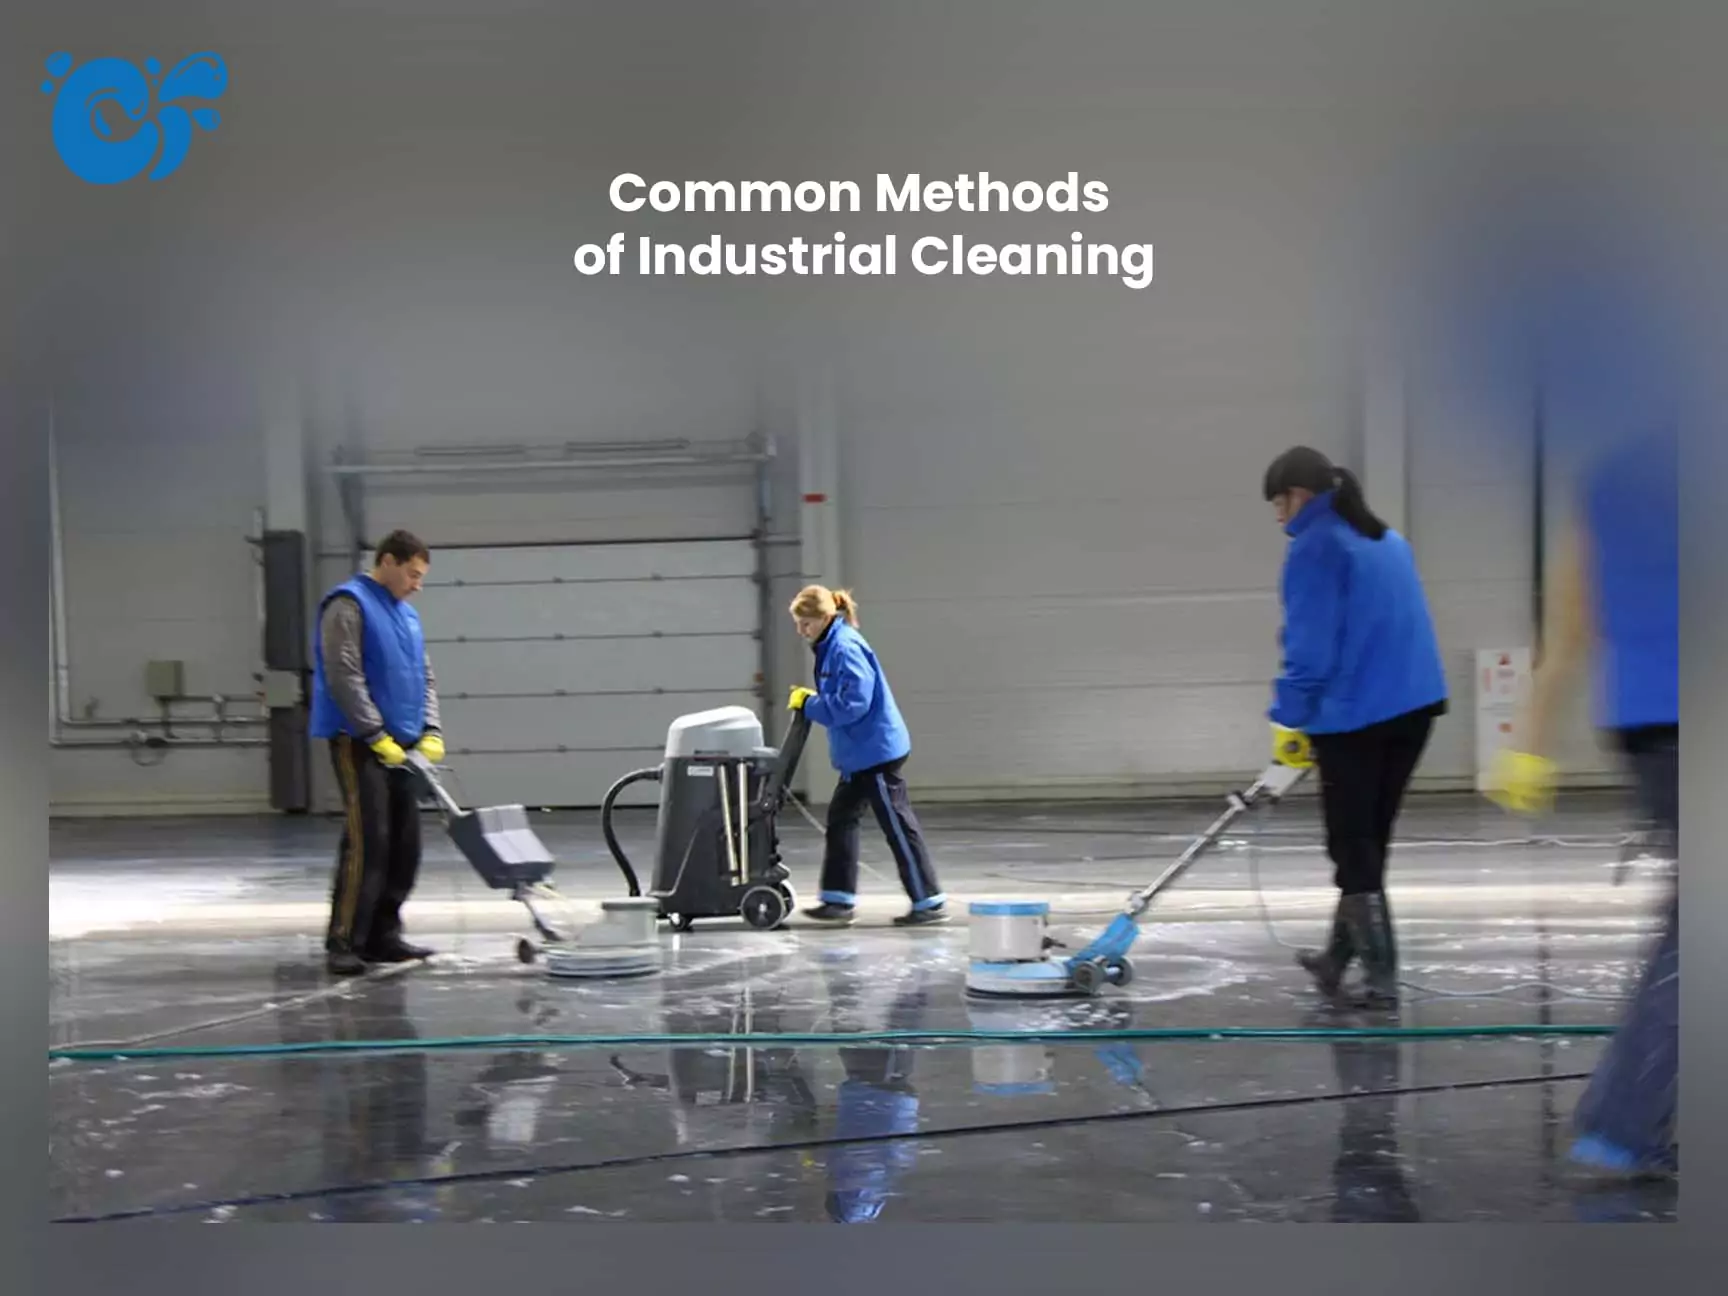 Common Methods of Industrial Cleaning